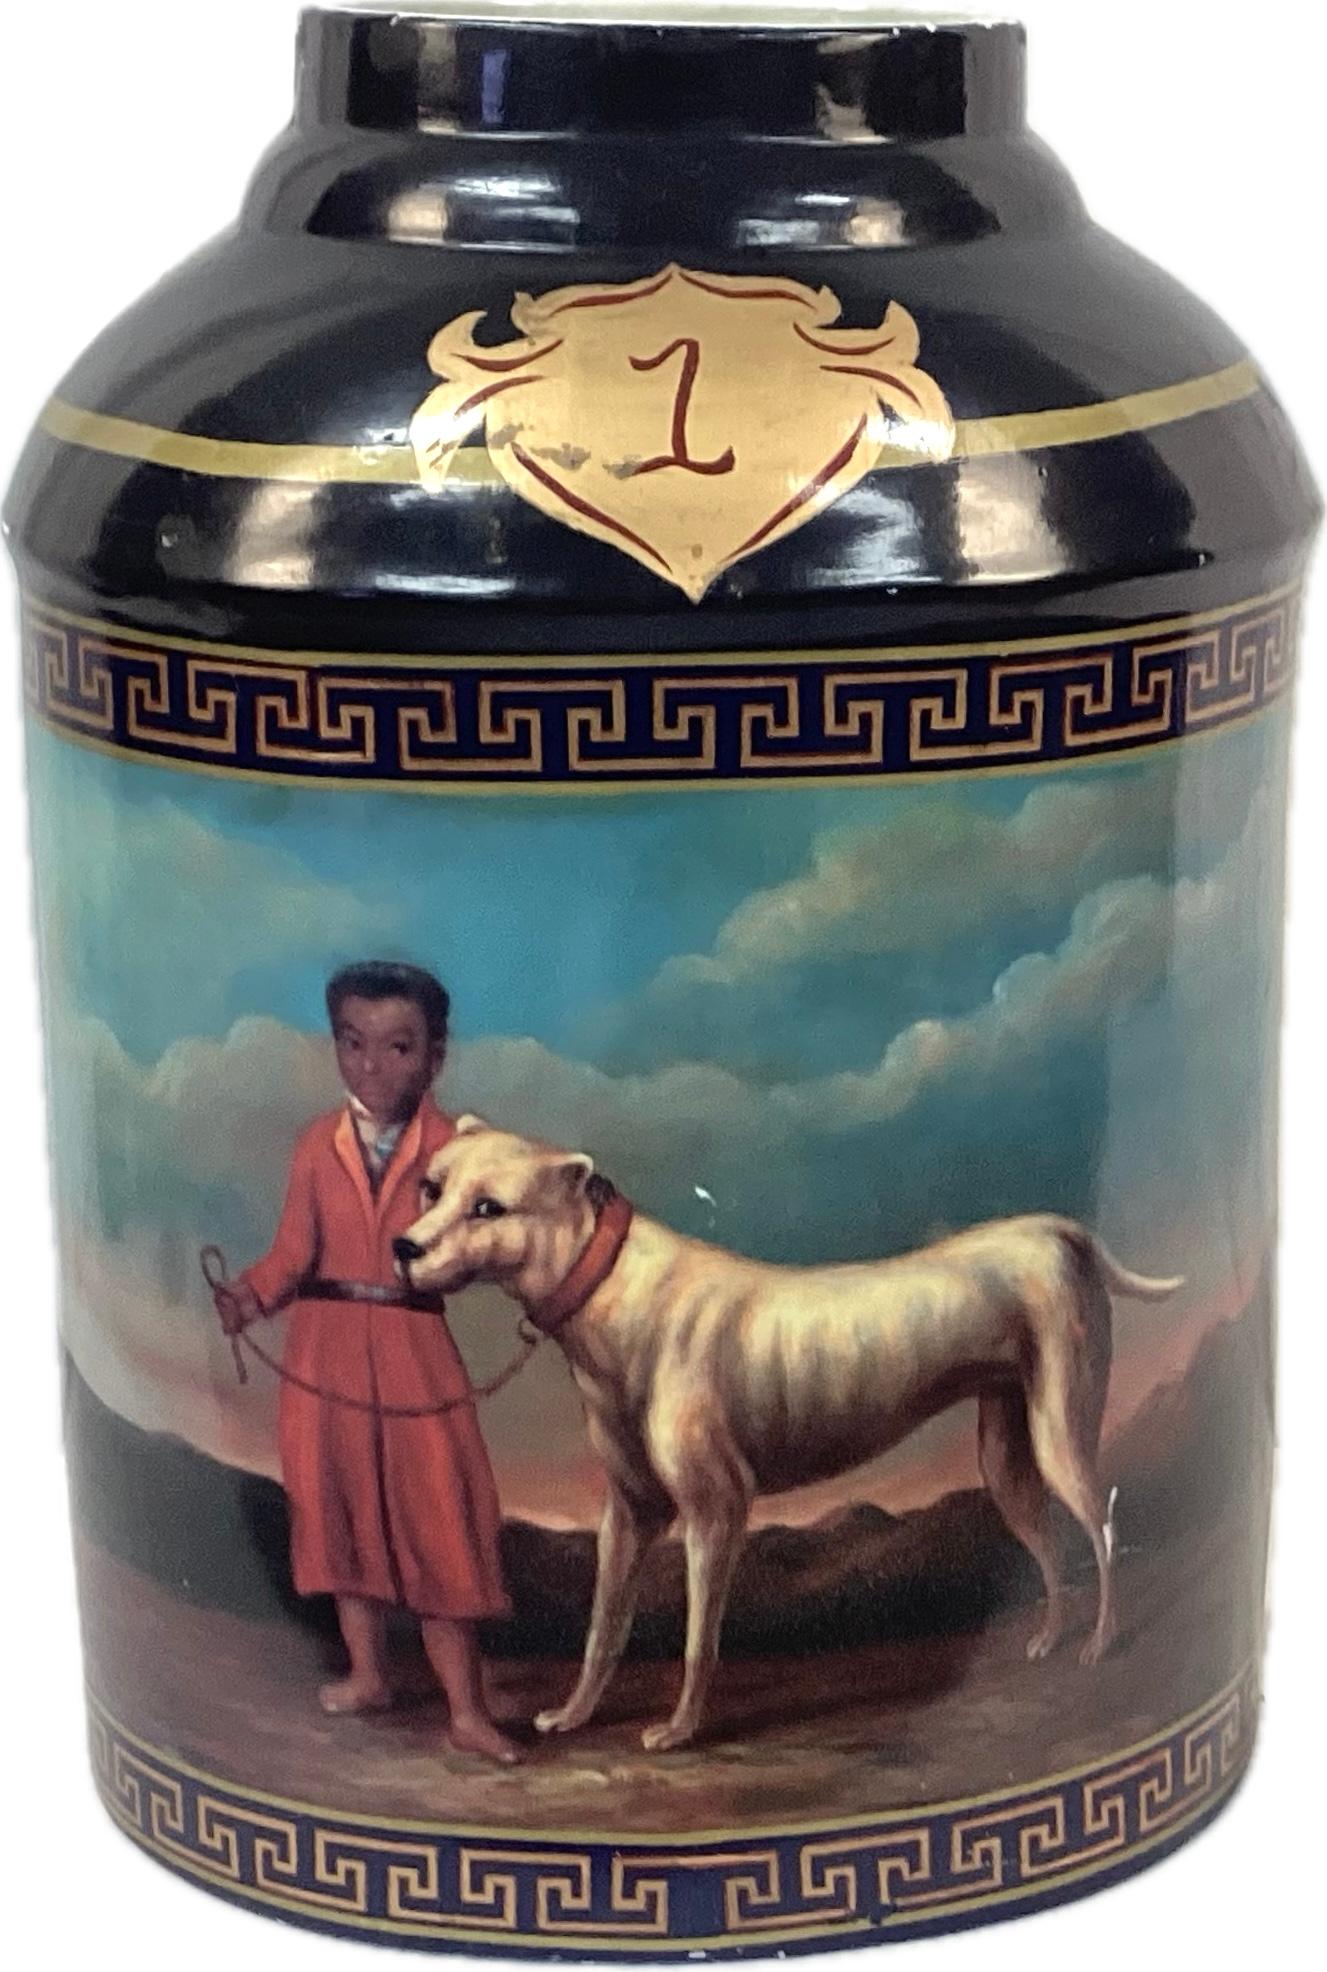 Chinese Export hand-painted porcelain tea caddy jar. Pictures of a boy and his dog adorn both sides of jar in rich colors of dark blue, gold, red and turquoise. Greek key border frames the scene. This type of jar may have been used to retail tea in